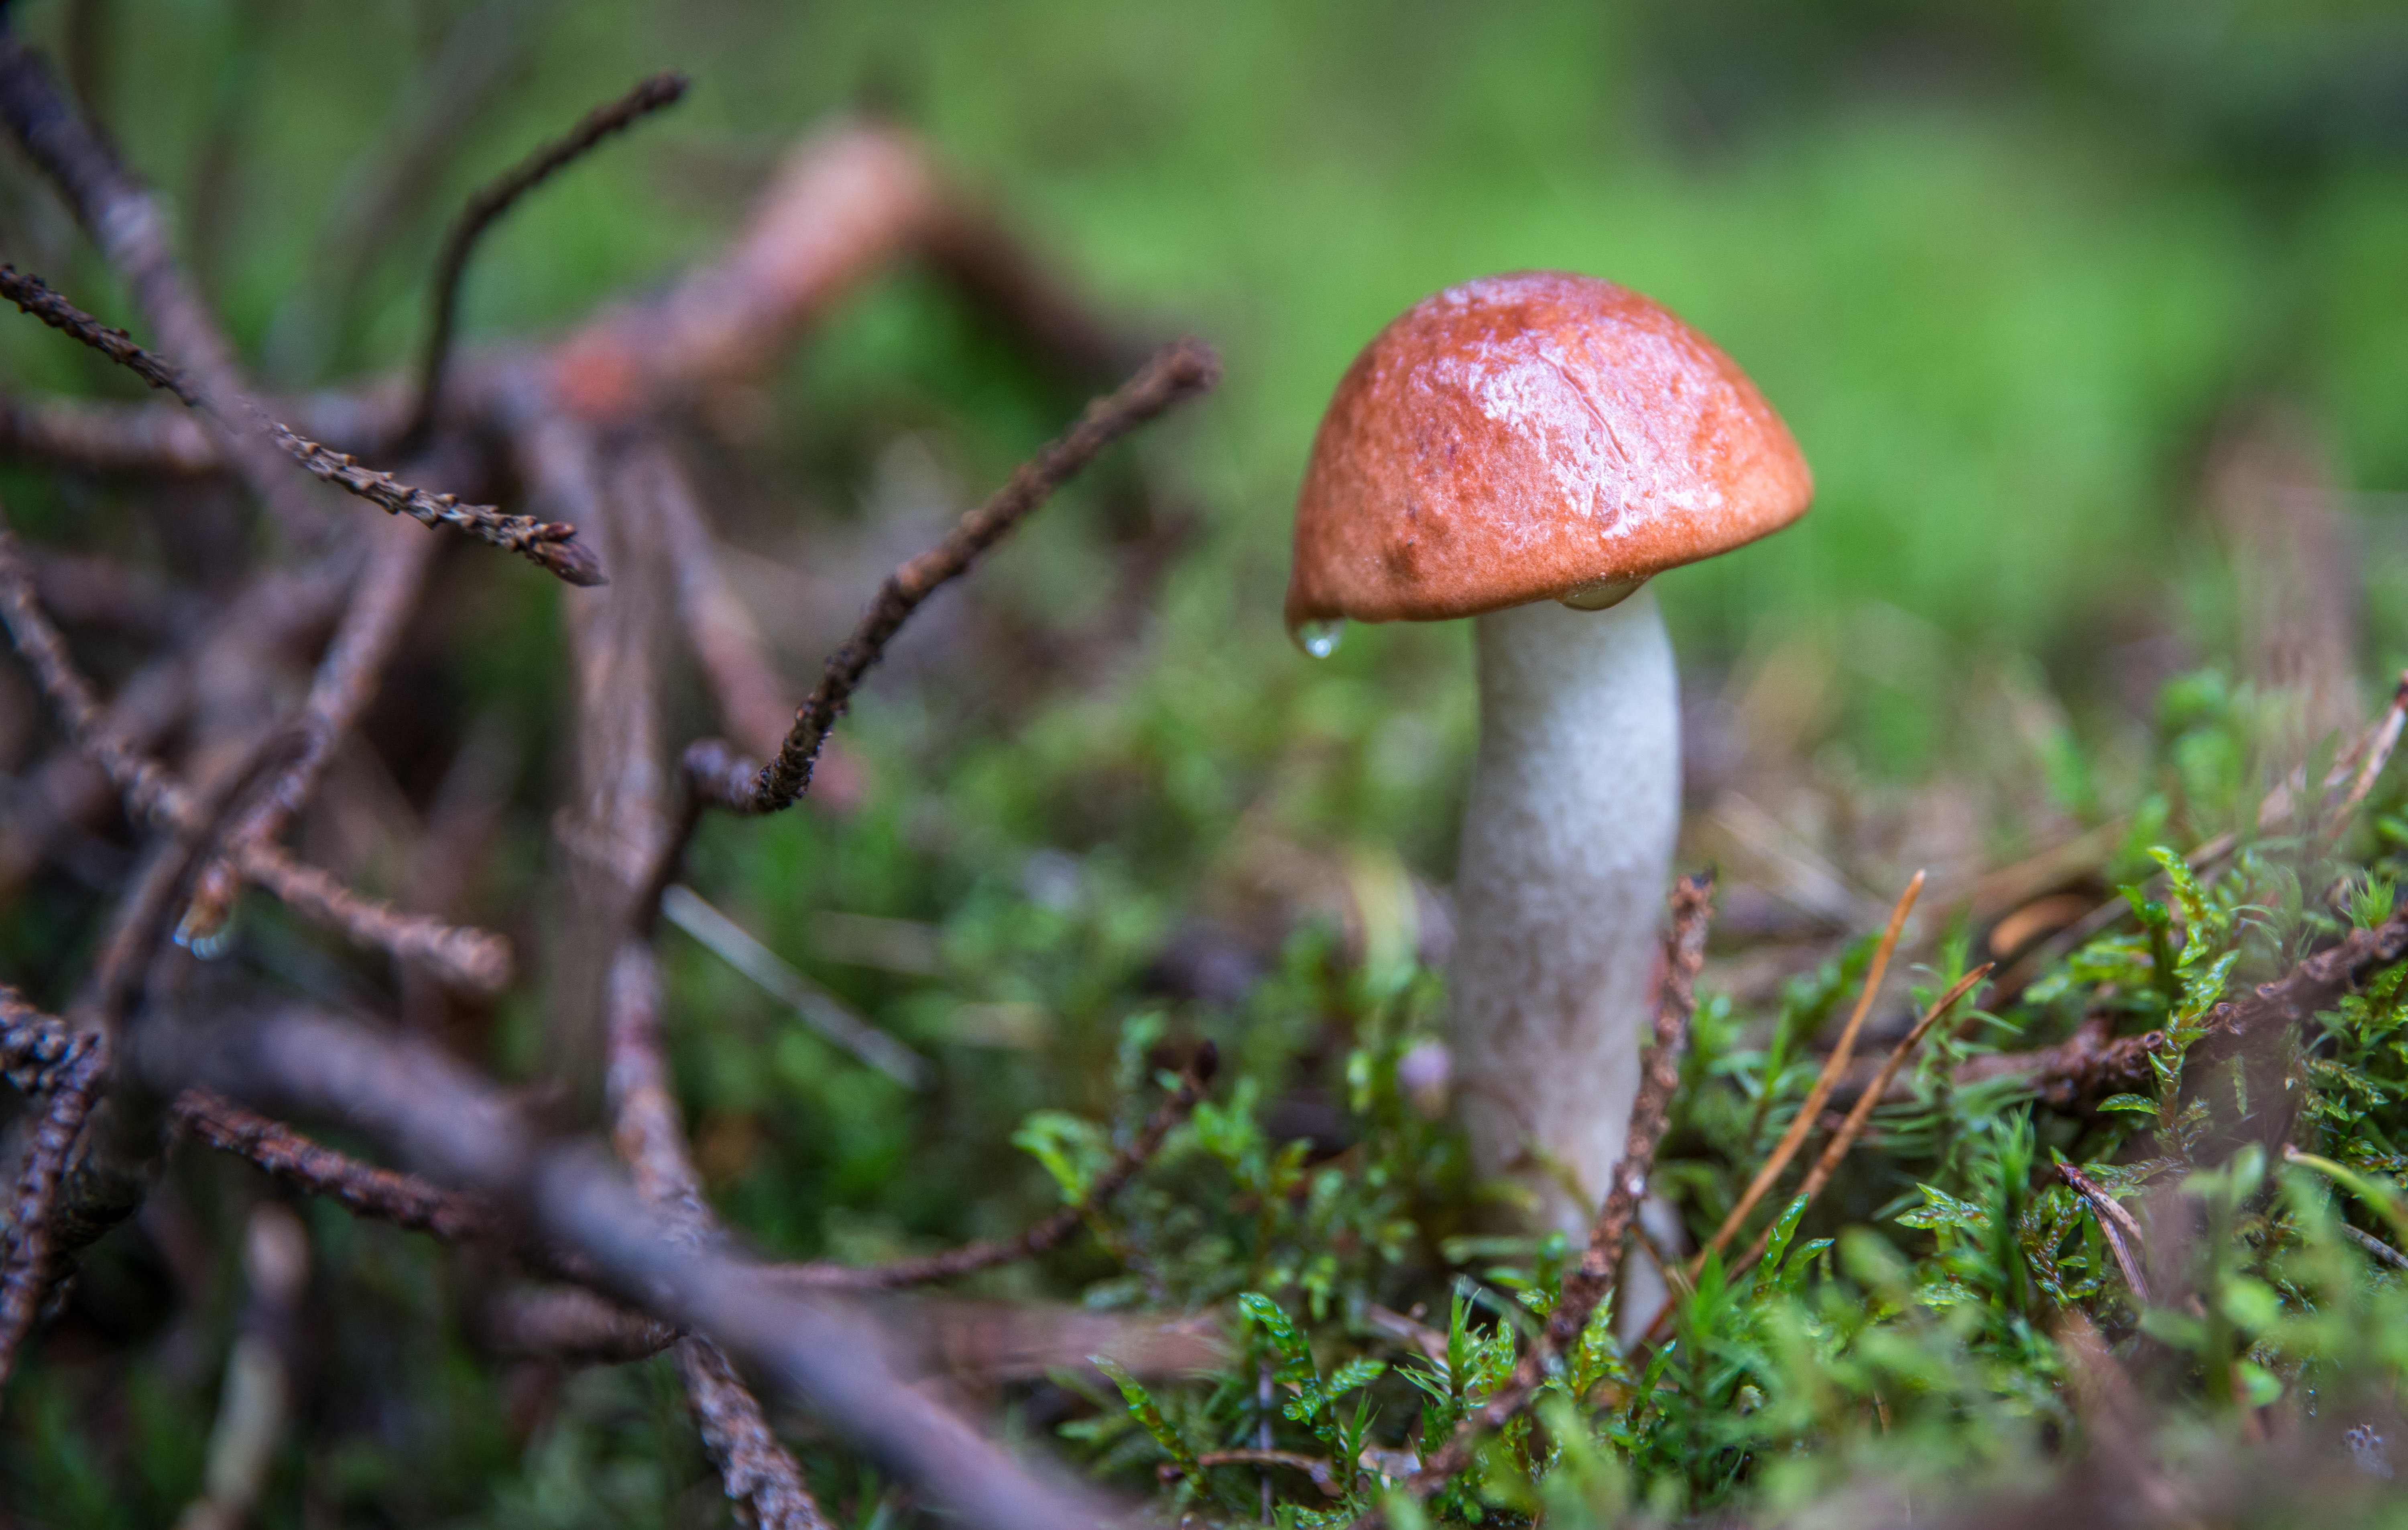 Close Up Focus Photo of a Brown and White Mushroom Beside Tree Branches, Blur, Moss, Wet, Toxic, HQ Photo